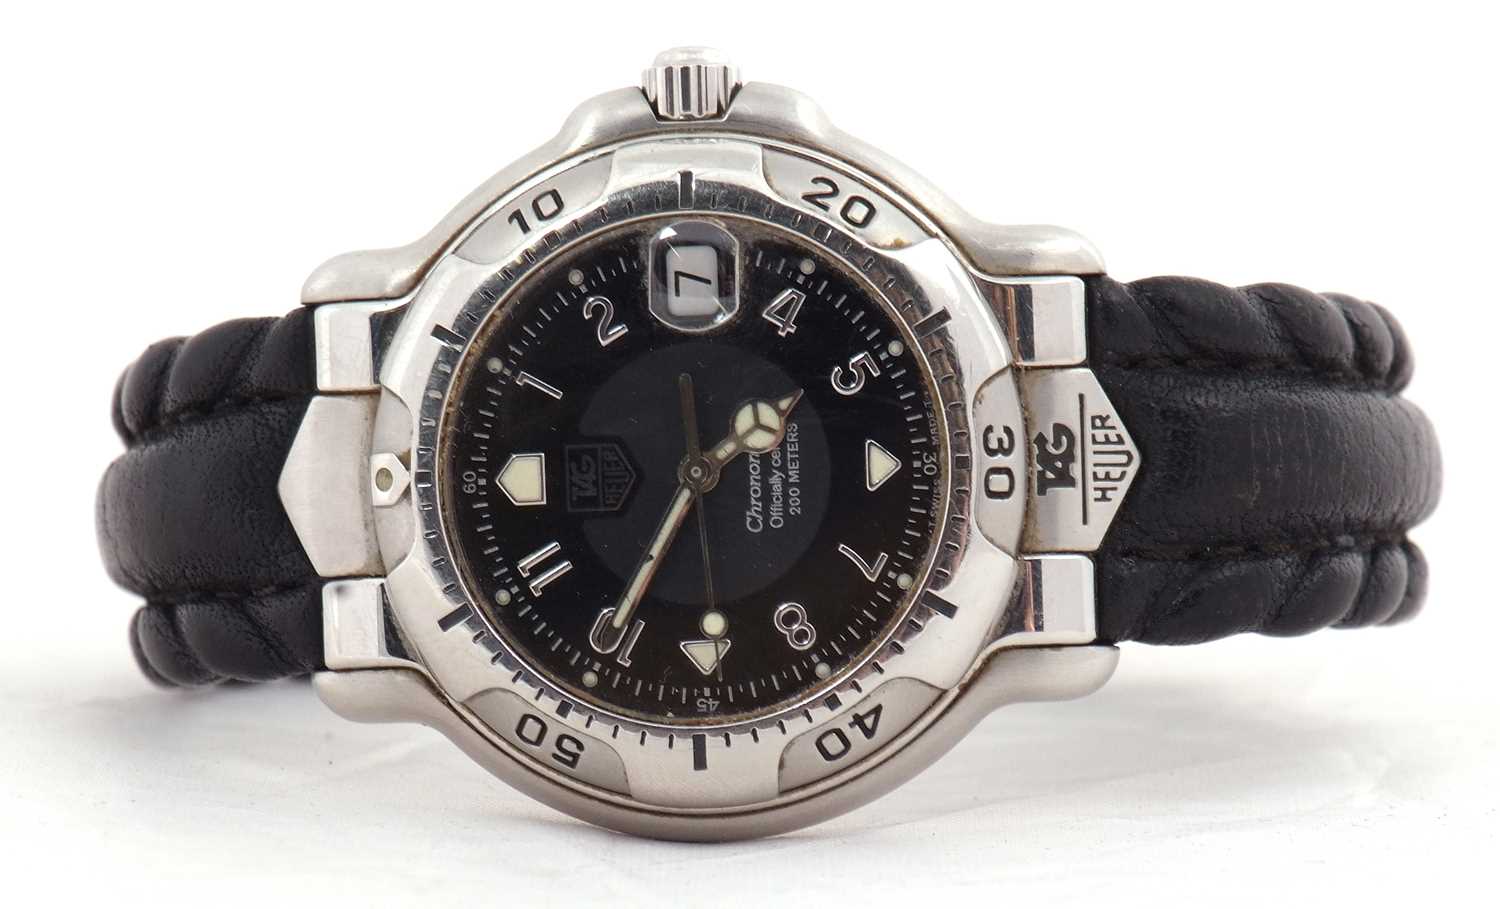 A Tag Heuer automatic gents wristwatch, reference number WH5111-K1, the watch has its original box - Image 3 of 8